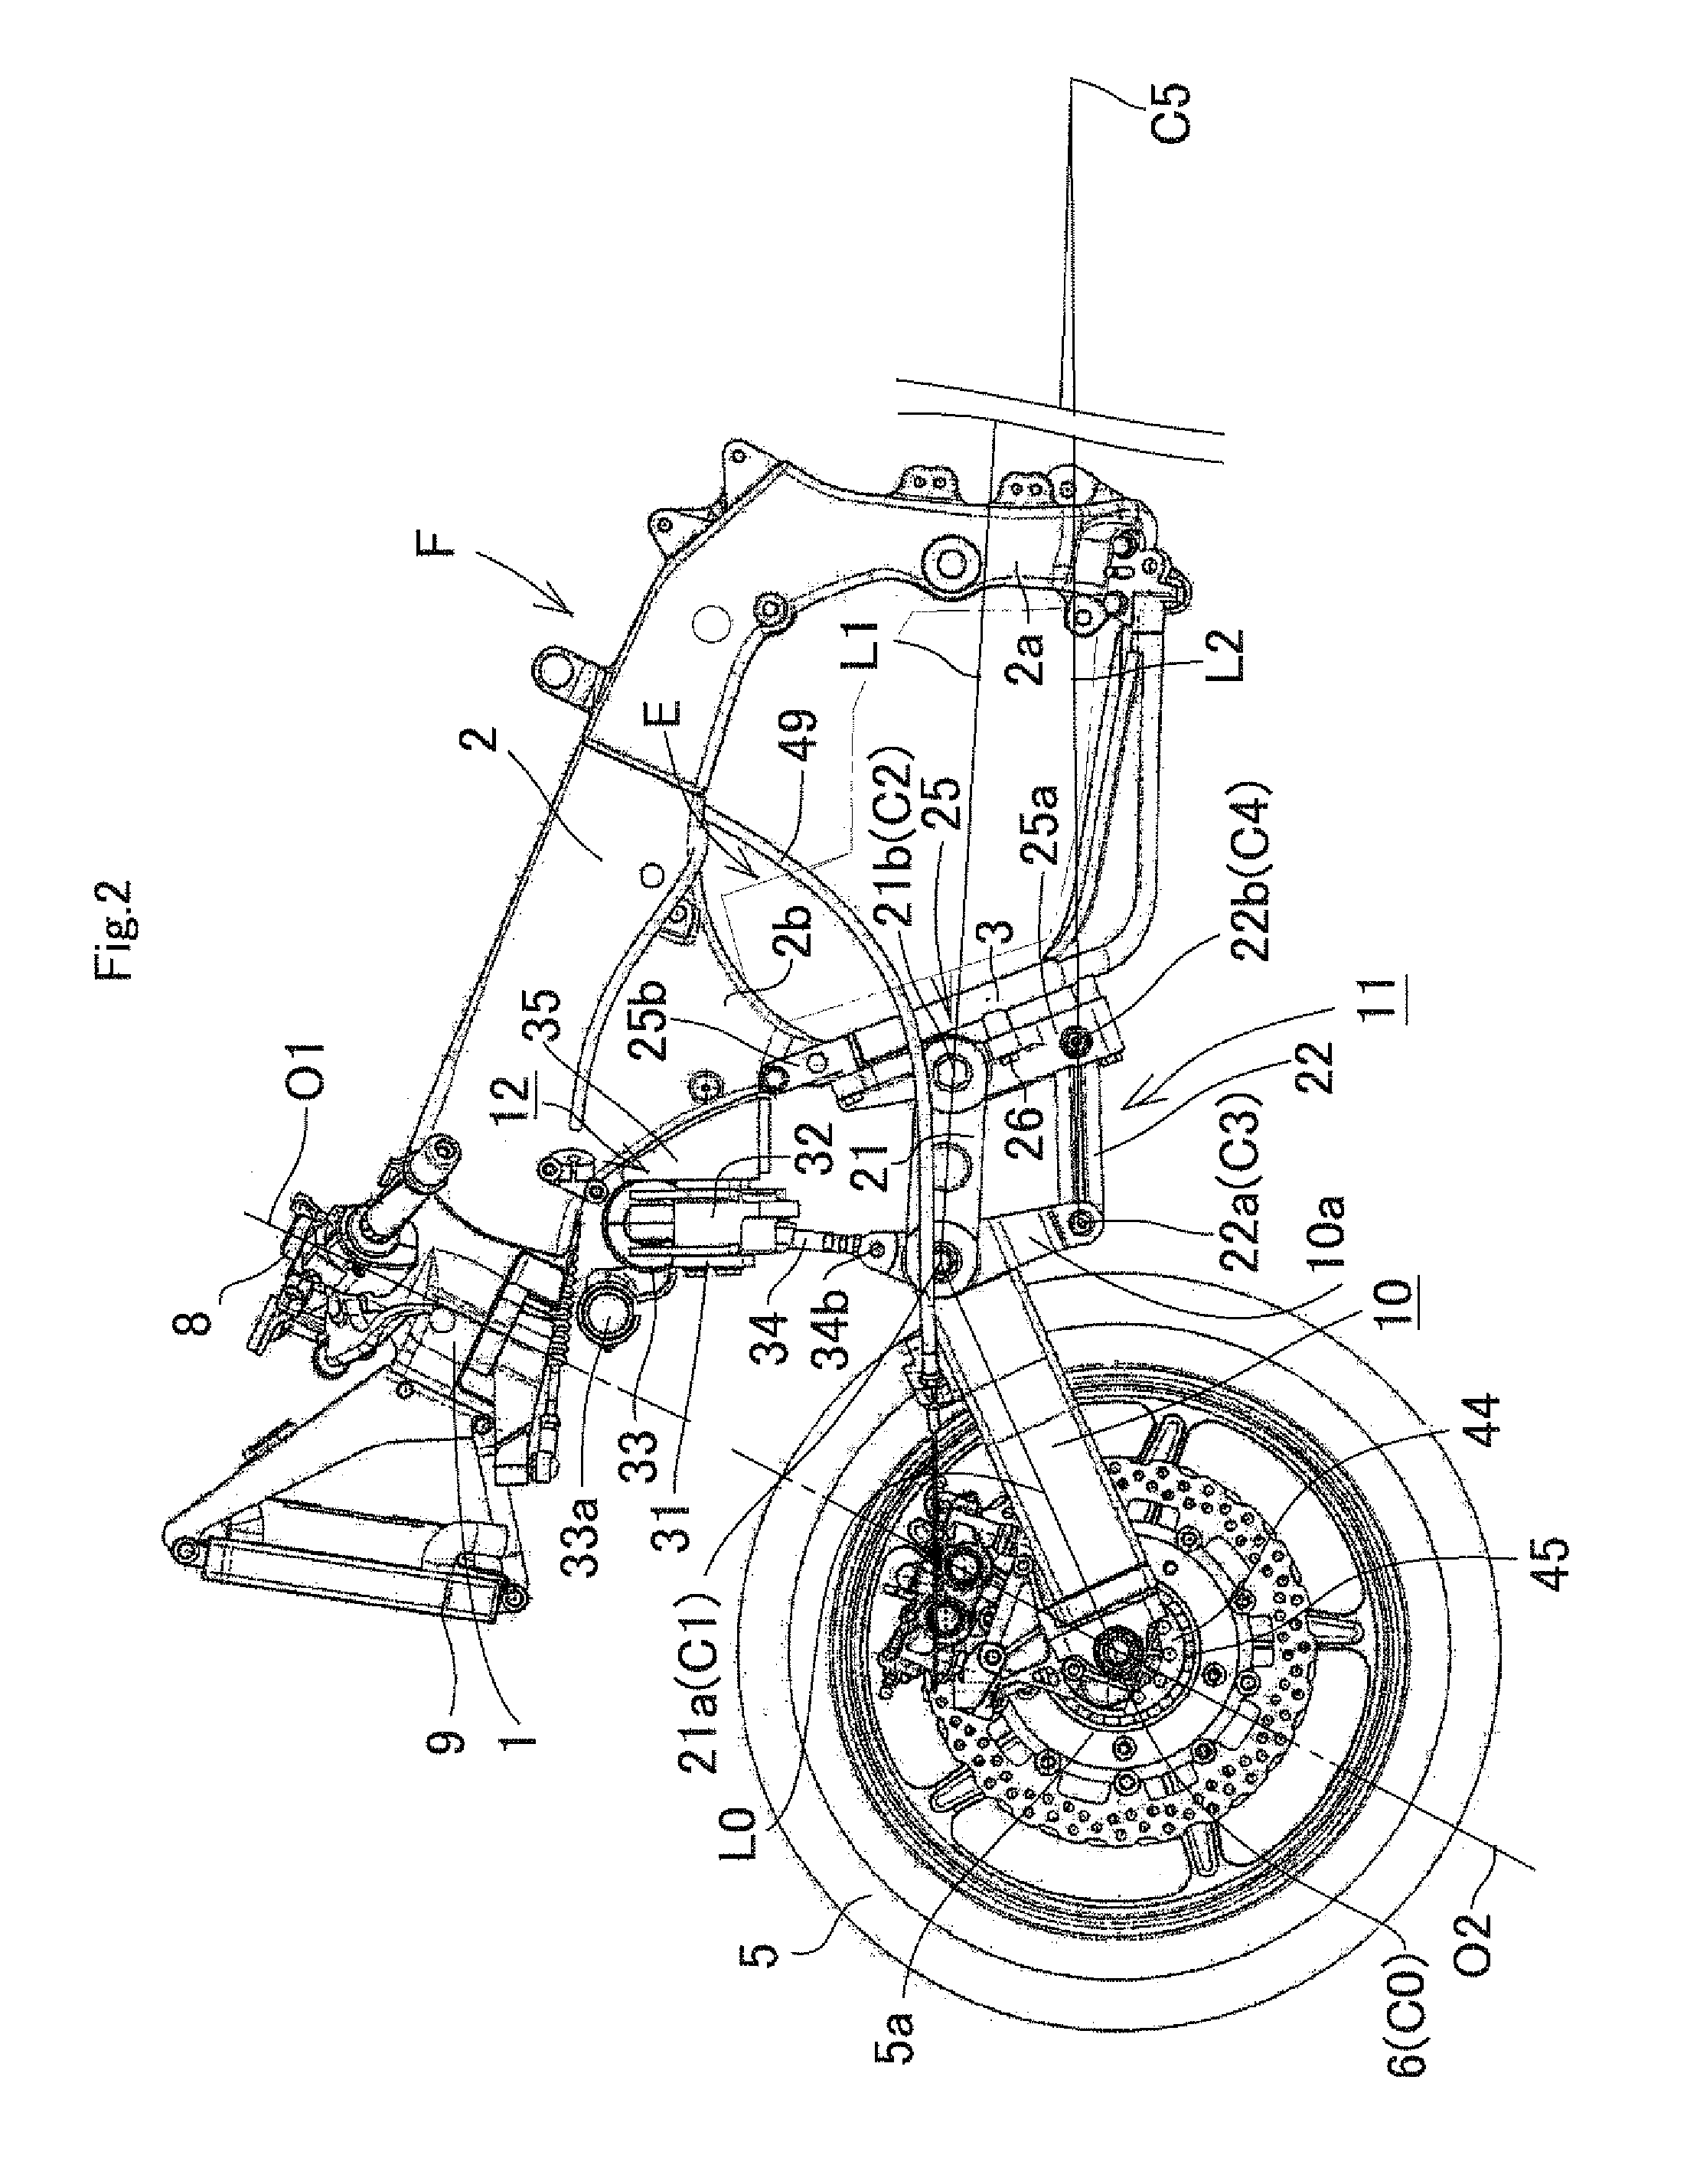 Front wheel supporting structure for straddle-type vehicle